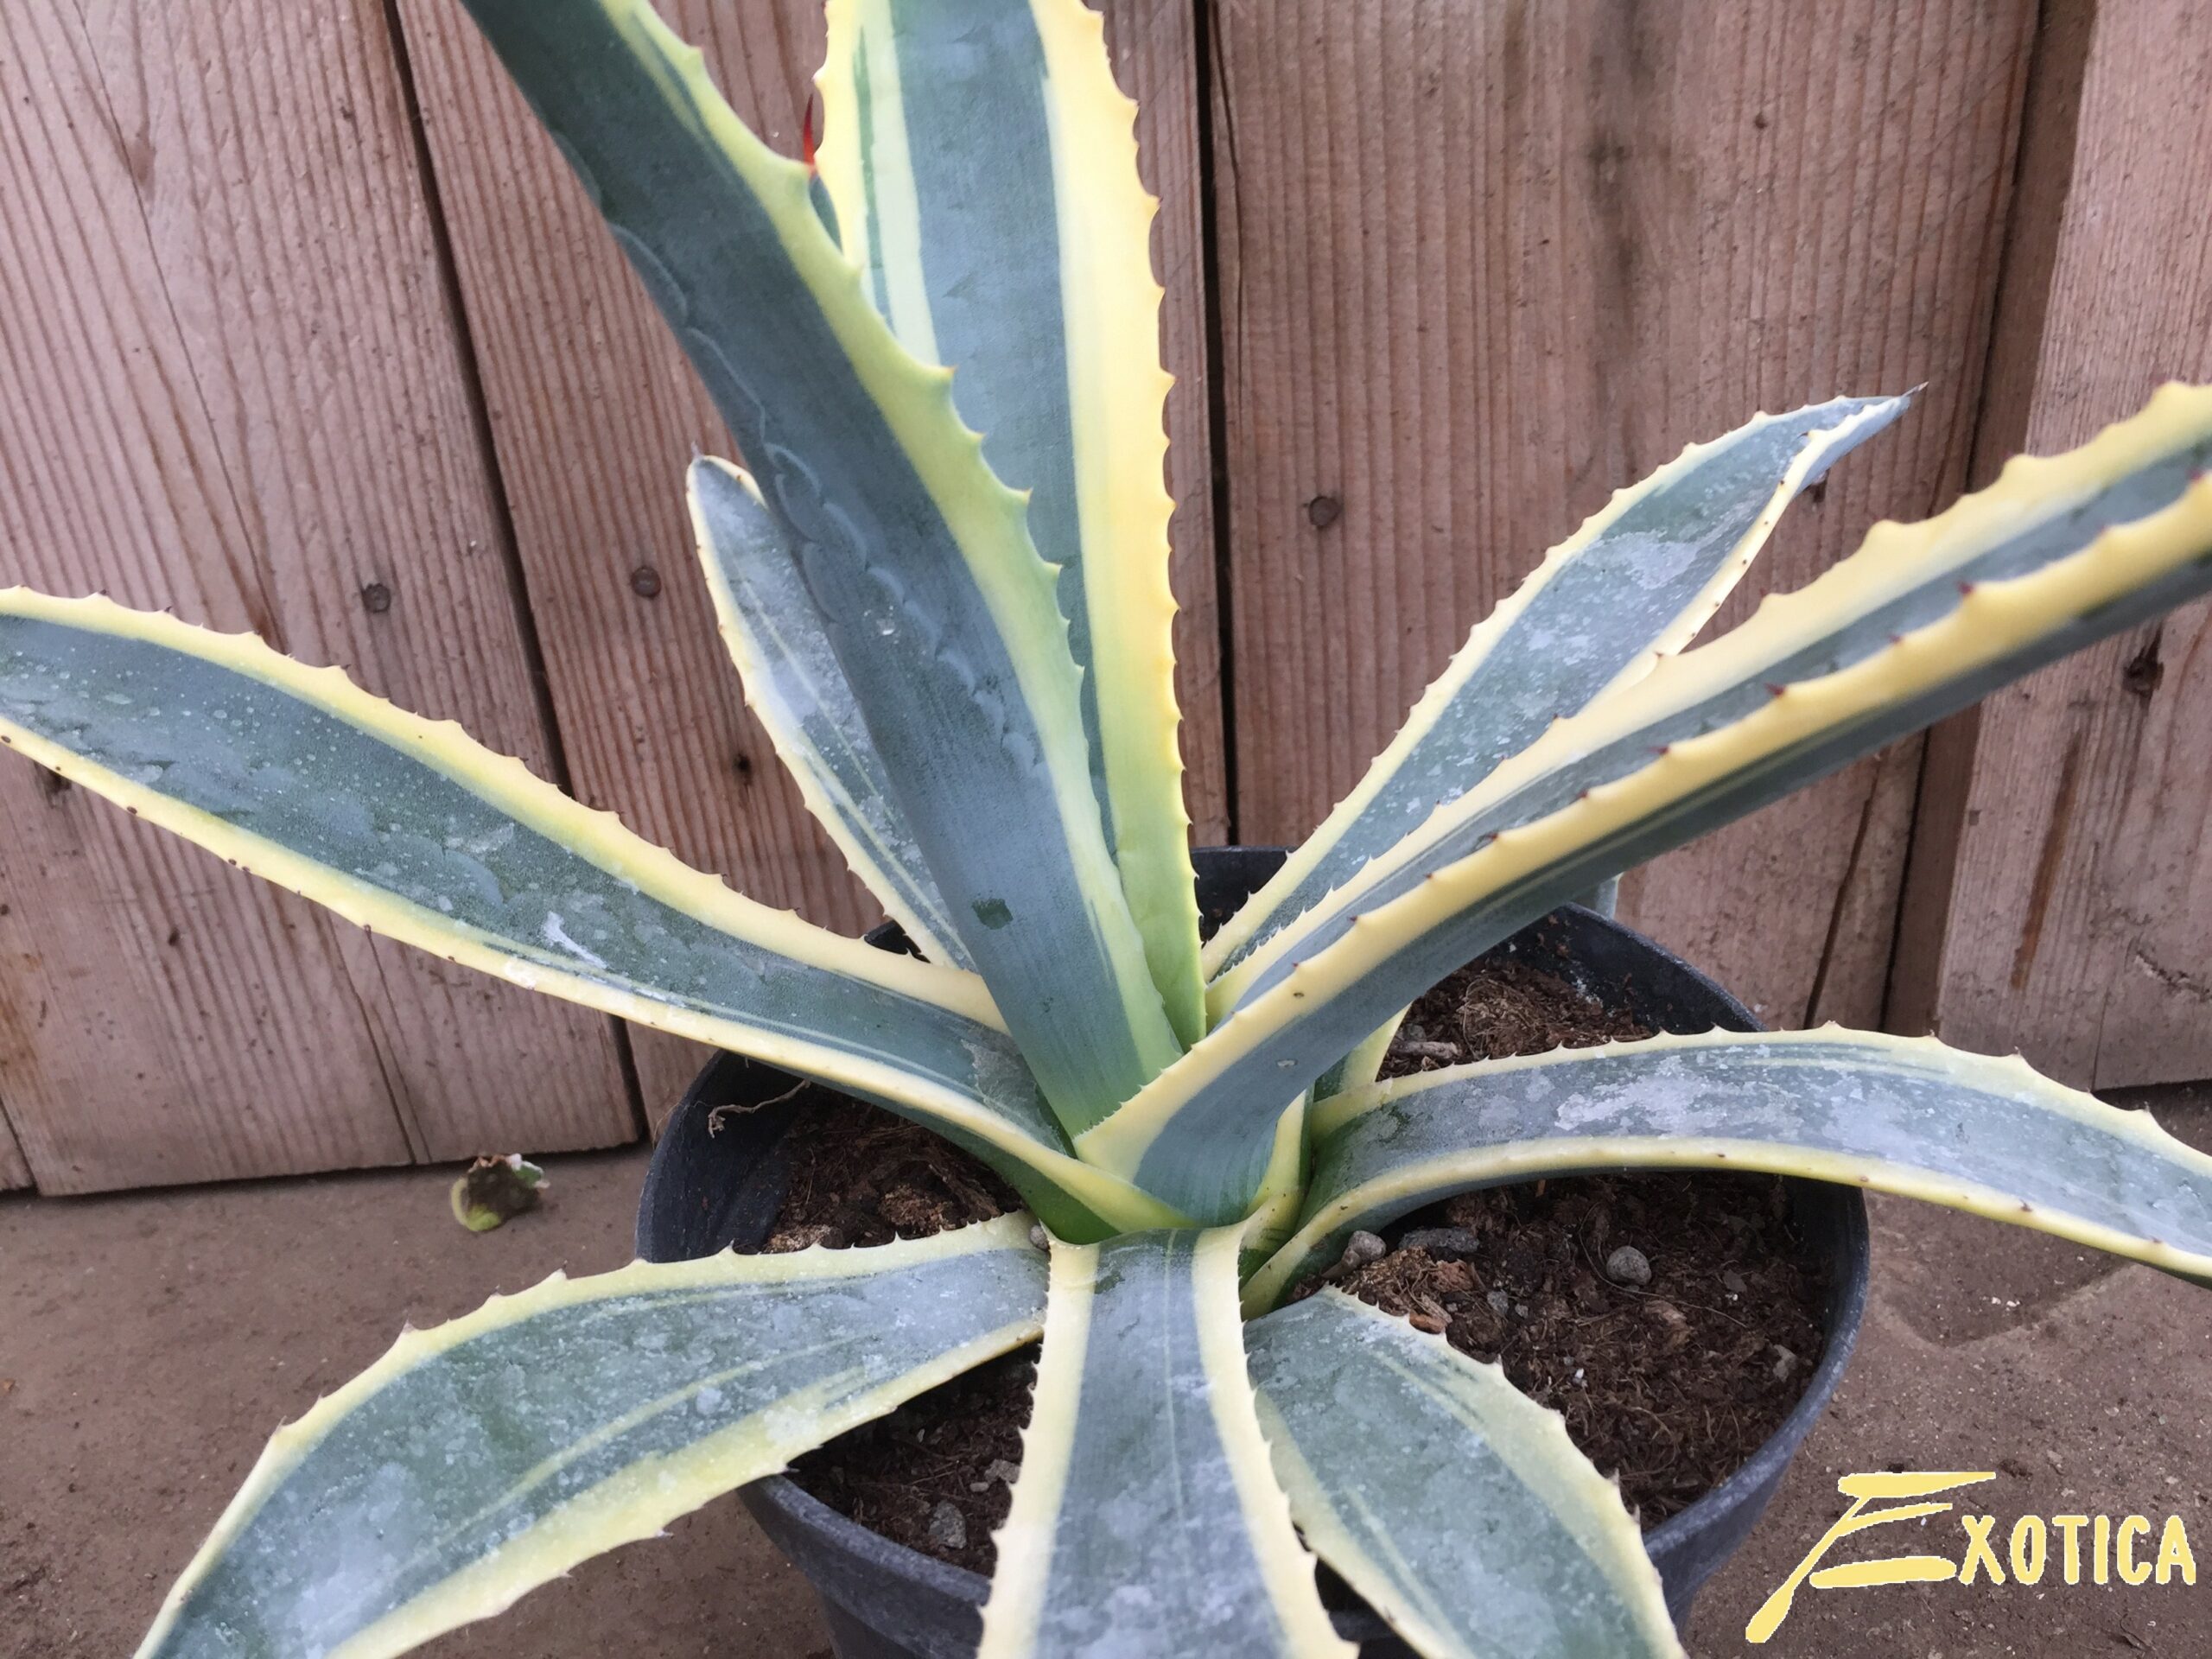 Americana agave Growing and